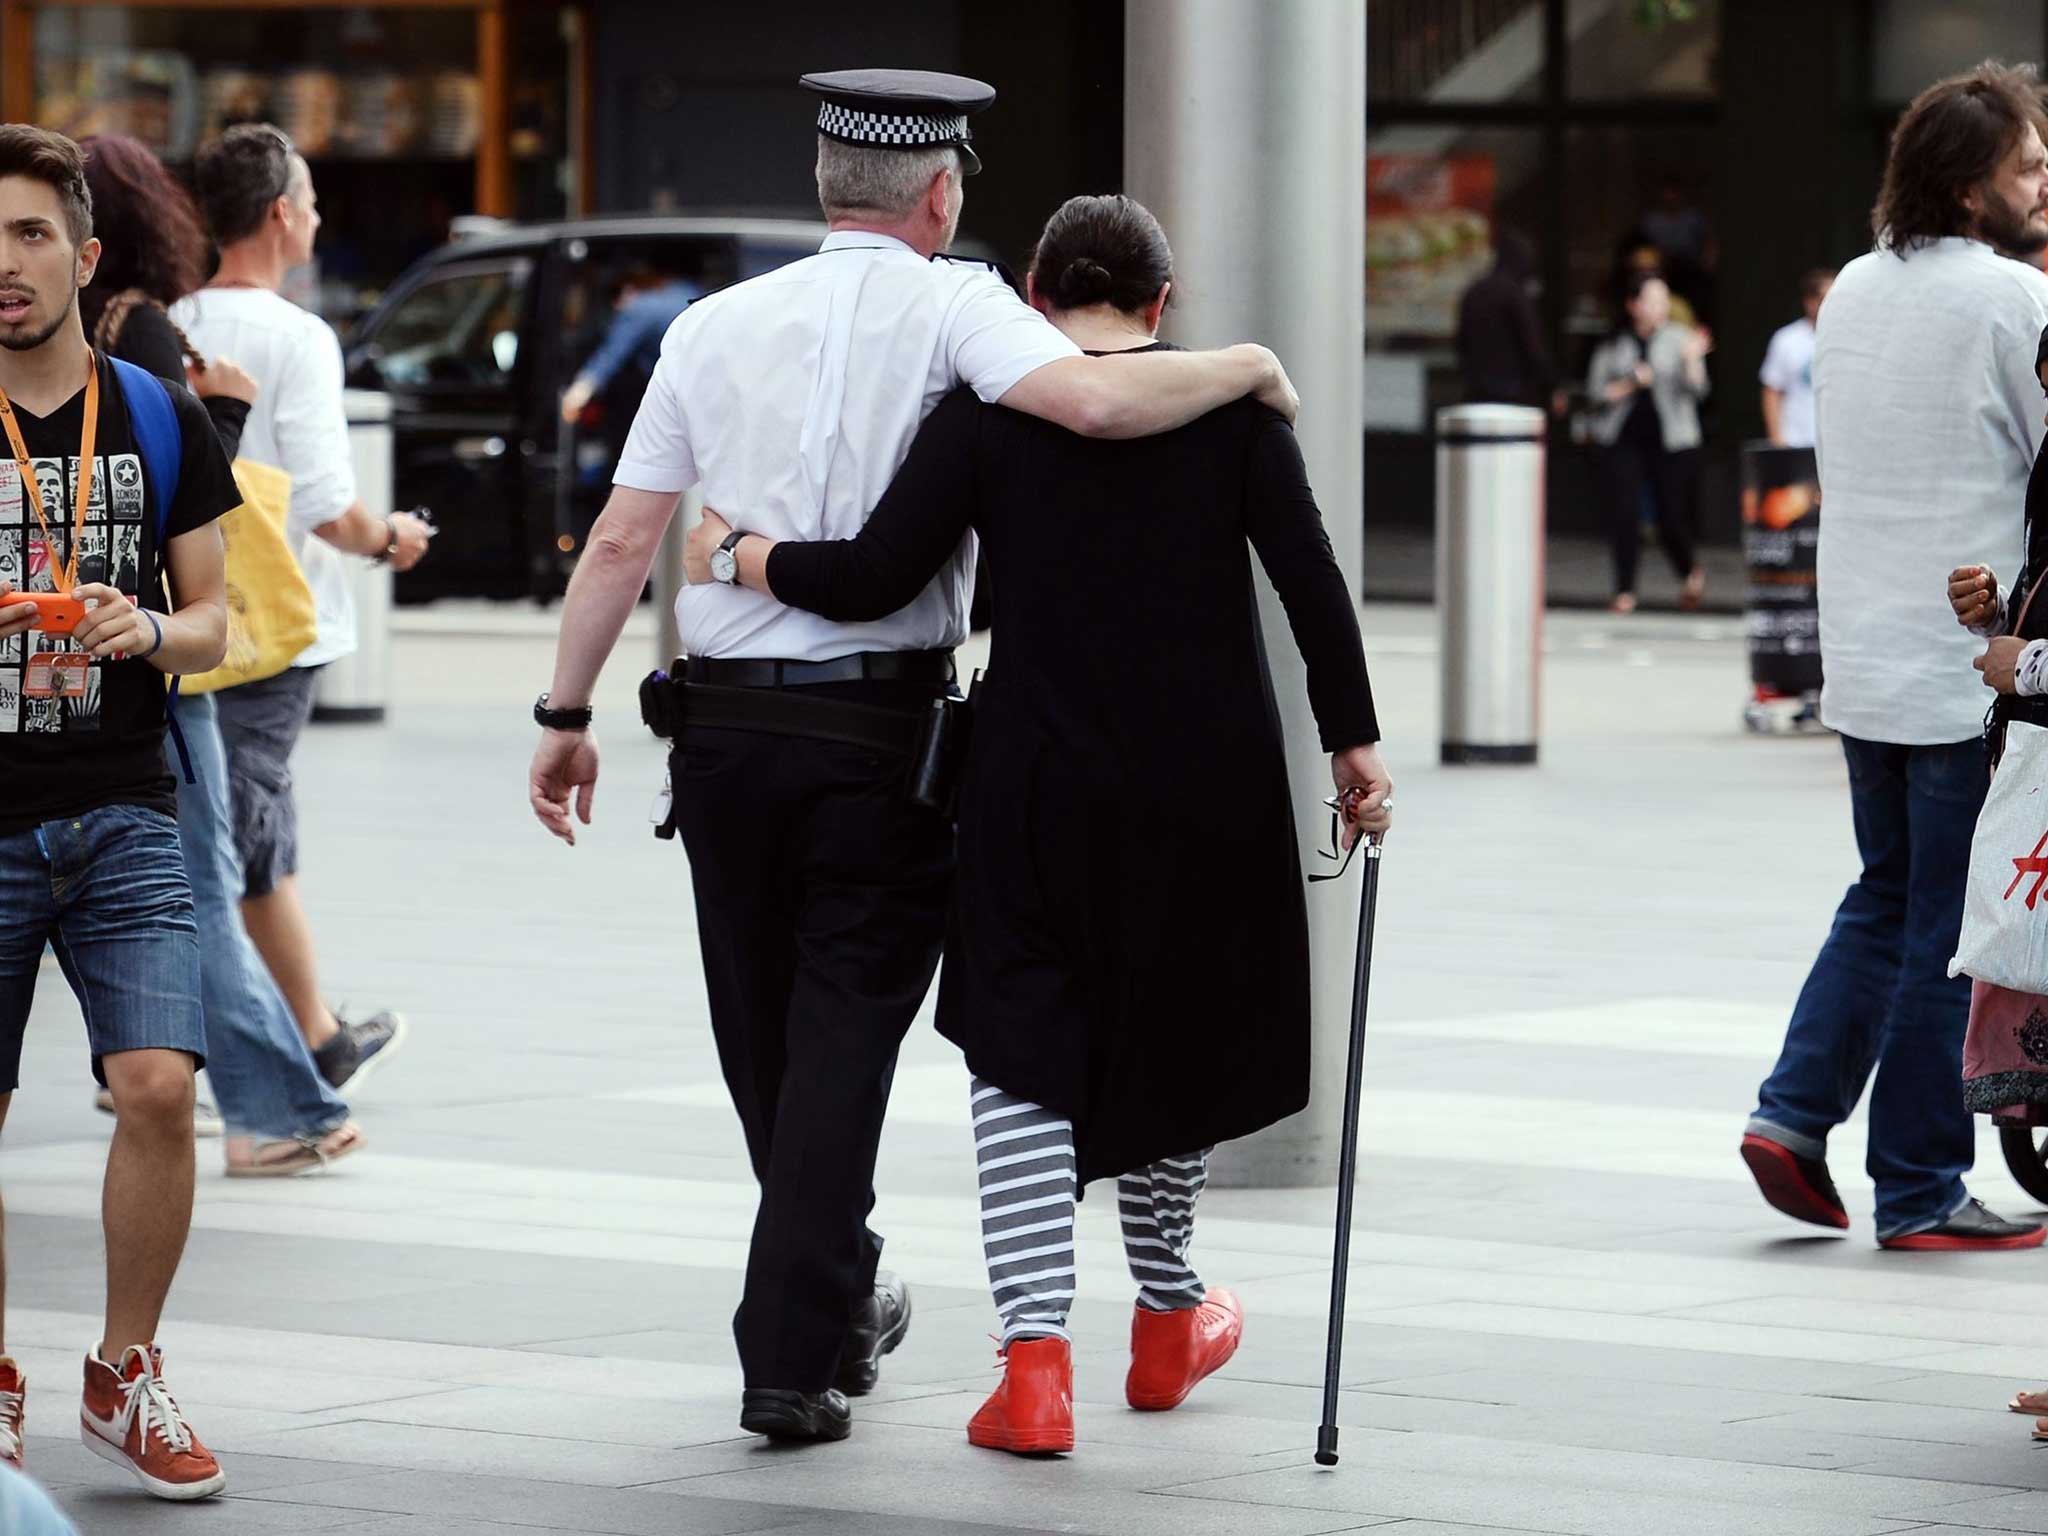 7/7 survivor Gill Hicks hugs PC Andy Maxwell, who came to her aid when she was injured at Kings Cross Station in London